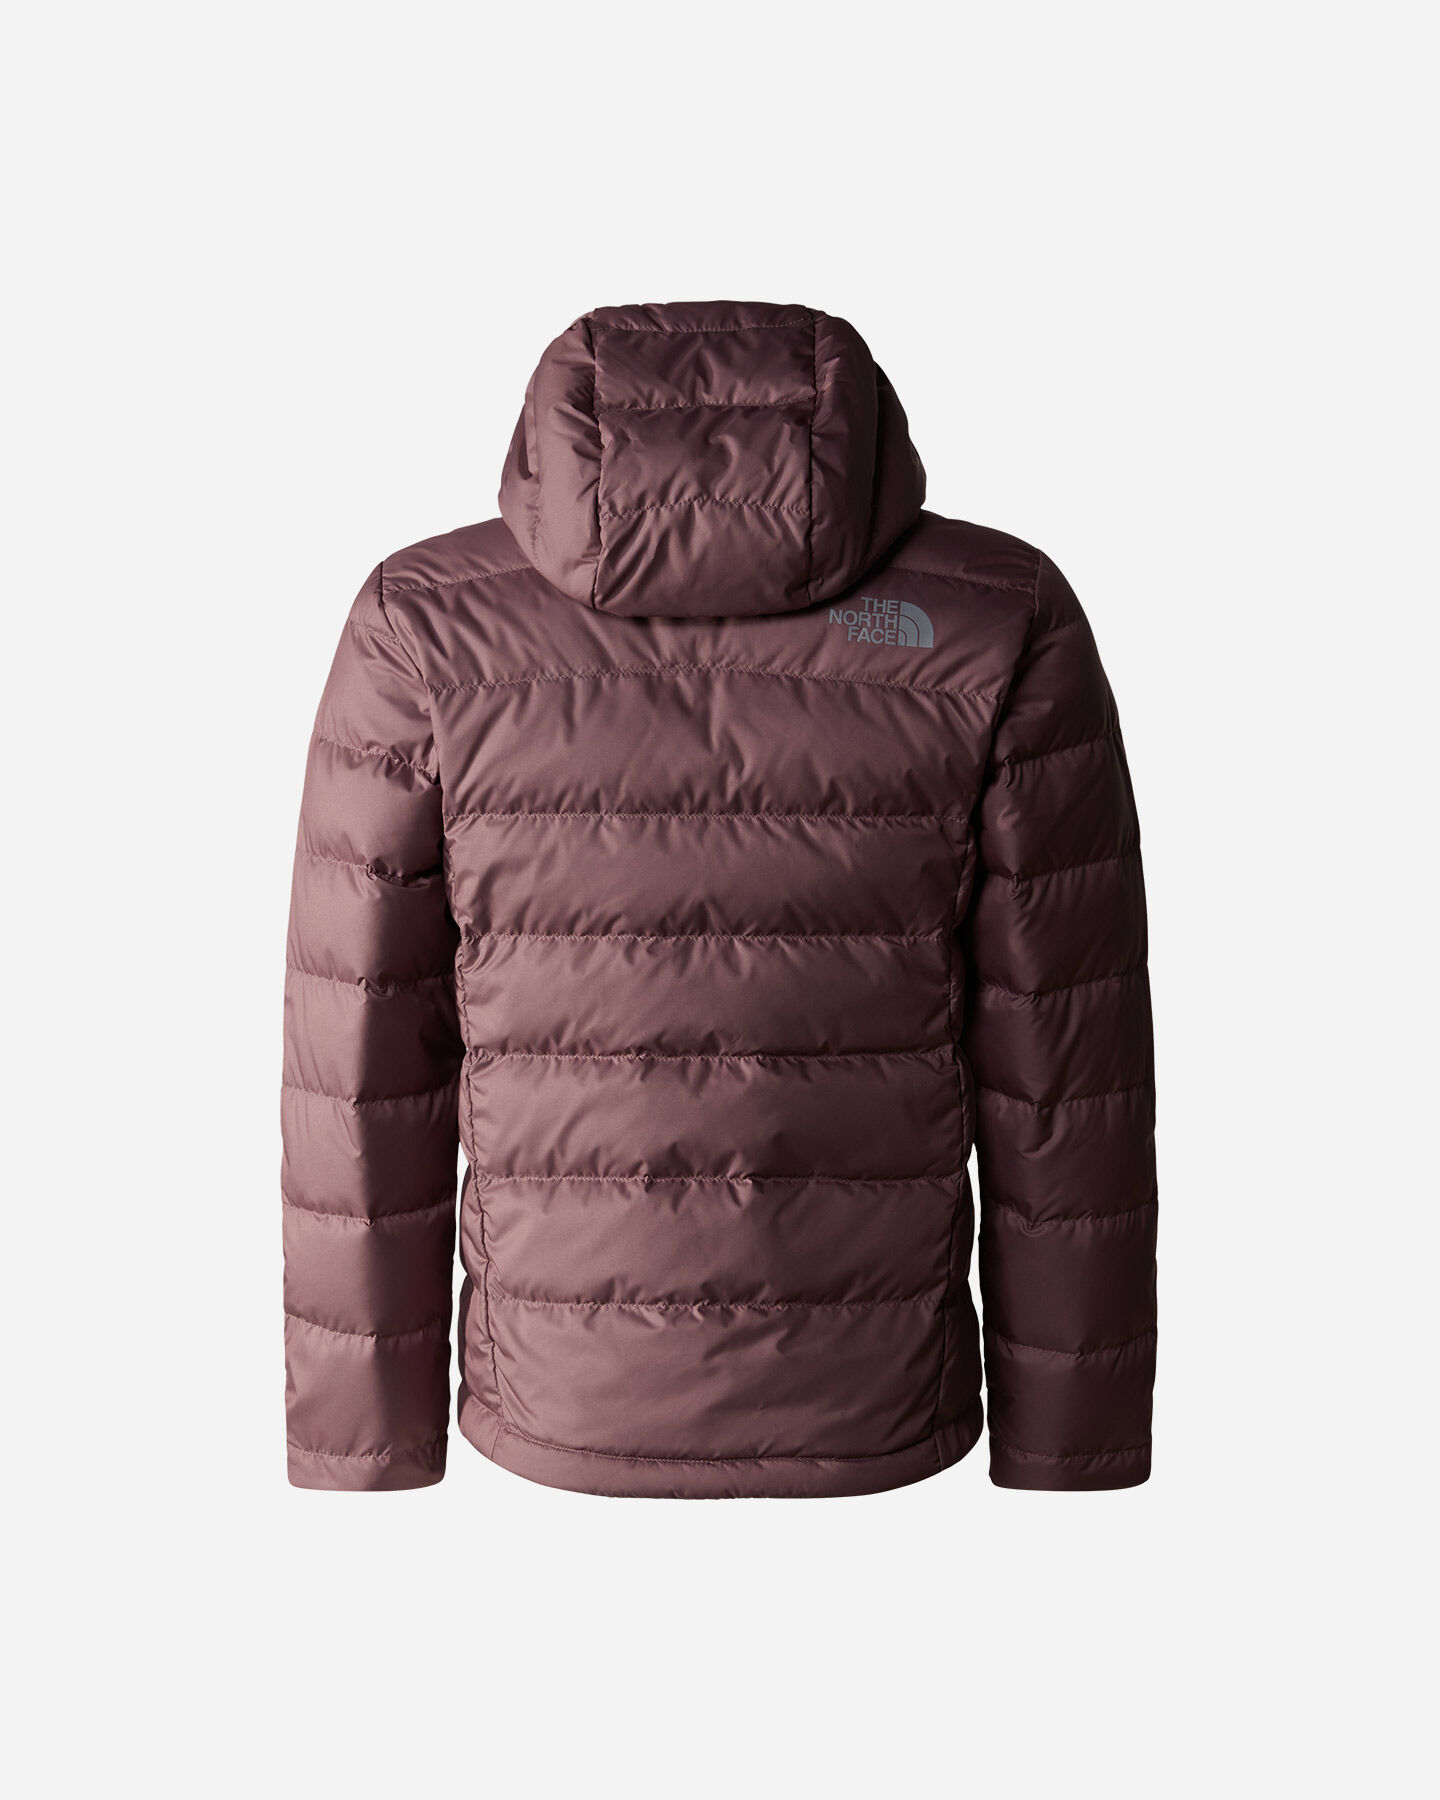  Giubbotto THE NORTH FACE NEVER STOP JR S5599274|I0V|S scatto 1